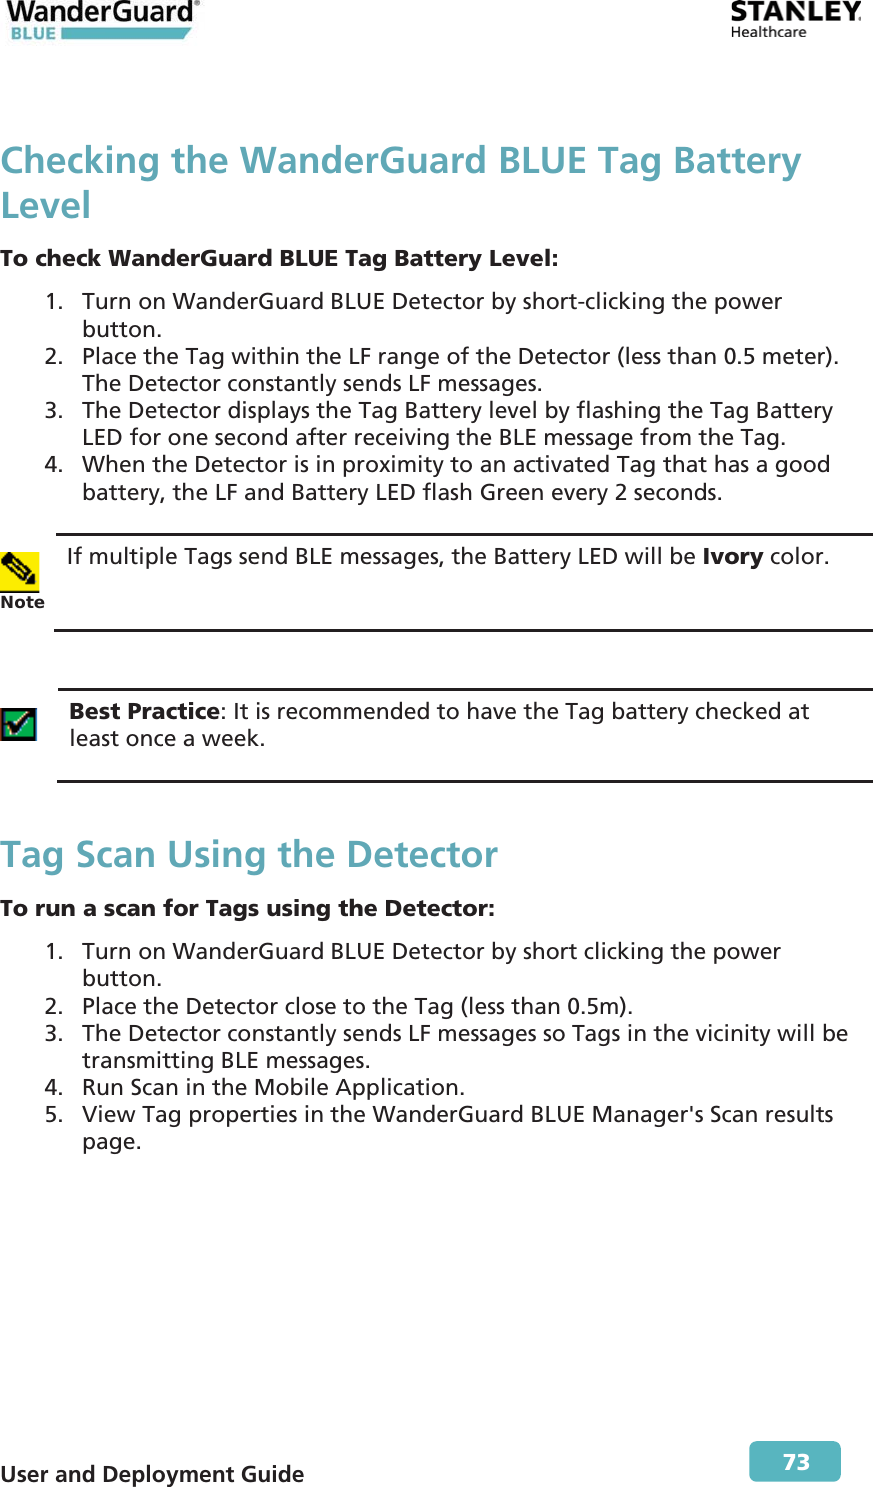  User and Deployment Guide        73 Checking the WanderGuard BLUE Tag Battery Level To check WanderGuard BLUE Tag Battery Level: 1. Turn on WanderGuard BLUE Detector by short-clicking the power button. 2. Place the Tag within the LF range of the Detector (less than 0.5 meter). The Detector constantly sends LF messages. 3. The Detector displays the Tag Battery level by flashing the Tag Battery LED for one second after receiving the BLE message from the Tag. 4. When the Detector is in proximity to an activated Tag that has a good battery, the LF and Battery LED flash Green every 2 seconds.   Note If multiple Tags send BLE messages, the Battery LED will be Ivory color.   Best Practice: It is recommended to have the Tag battery checked at least once a week. Tag Scan Using the Detector To run a scan for Tags using the Detector: 1. Turn on WanderGuard BLUE Detector by short clicking the power button. 2. Place the Detector close to the Tag (less than 0.5m). 3. The Detector constantly sends LF messages so Tags in the vicinity will be transmitting BLE messages. 4. Run Scan in the Mobile Application. 5. View Tag properties in the WanderGuard BLUE Manager&apos;s Scan results page. 